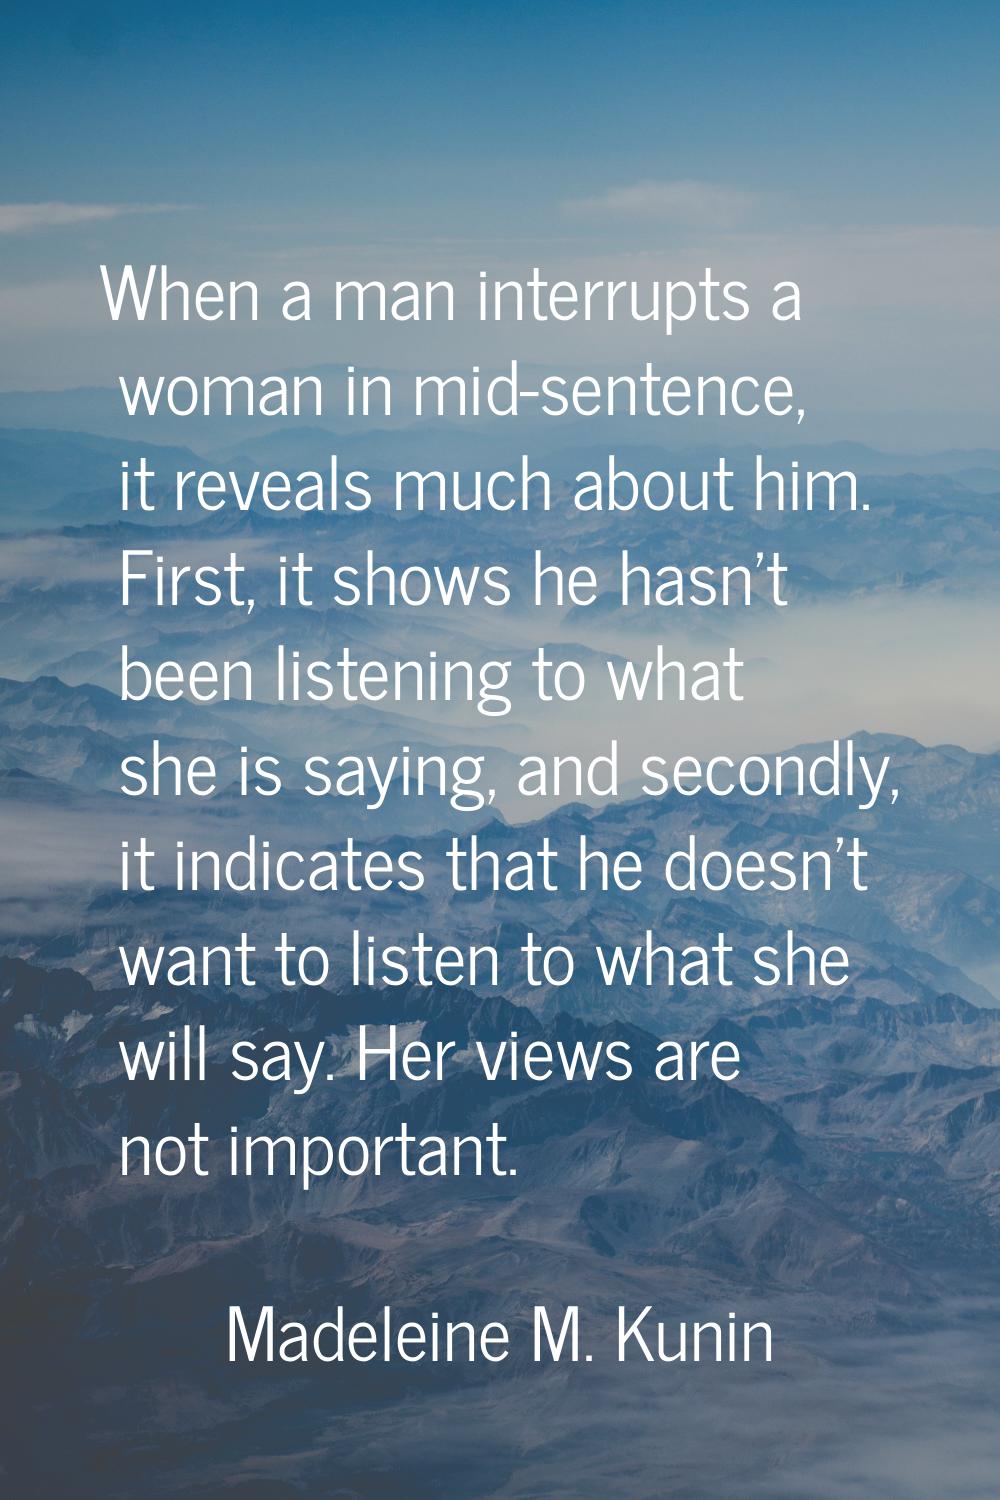 When a man interrupts a woman in mid-sentence, it reveals much about him. First, it shows he hasn't